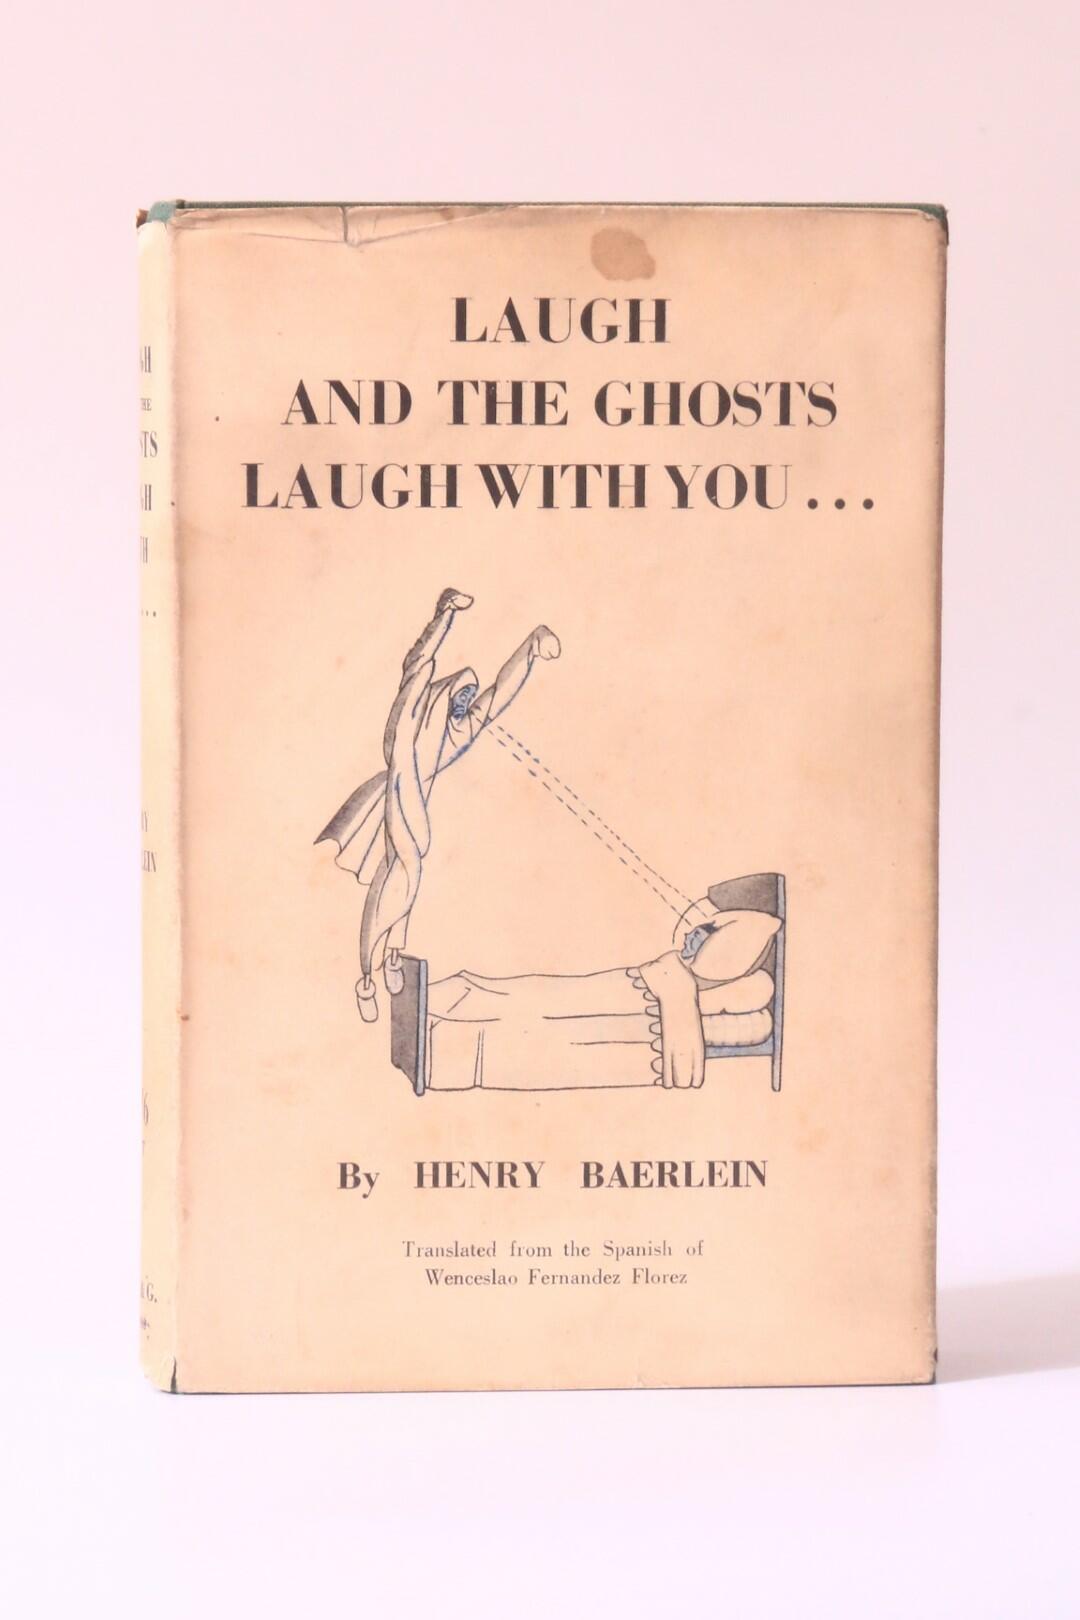 Henry Baerlein - Laugh and the Ghosts Laugh with you? - British Technical & General Press, 1951, Signed First Edition.